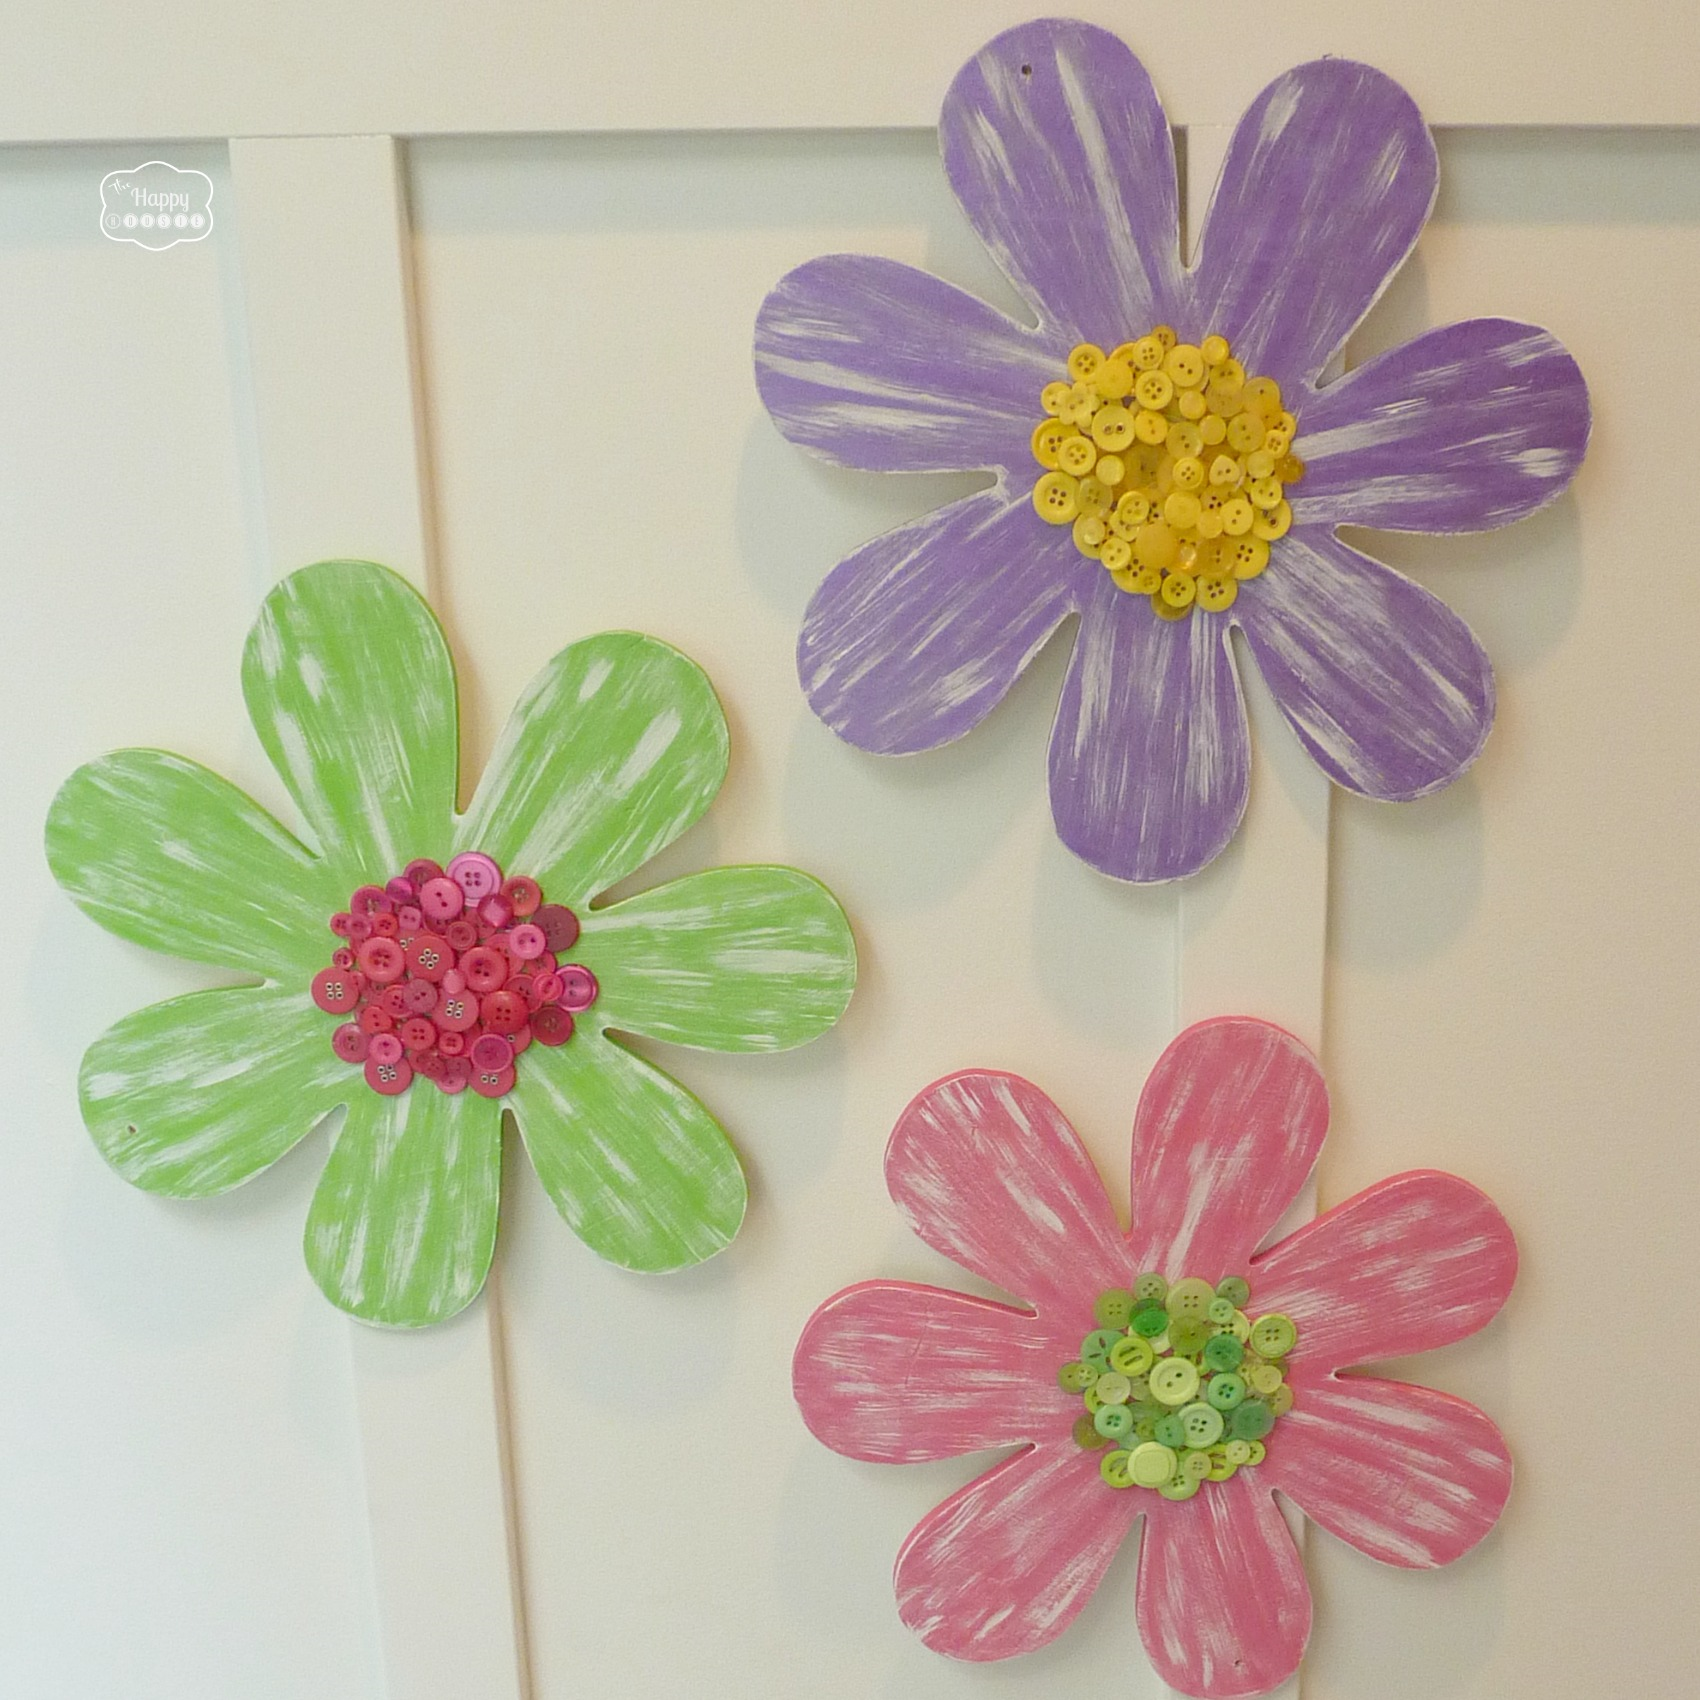 Painted Wood Flowers with Button Centers